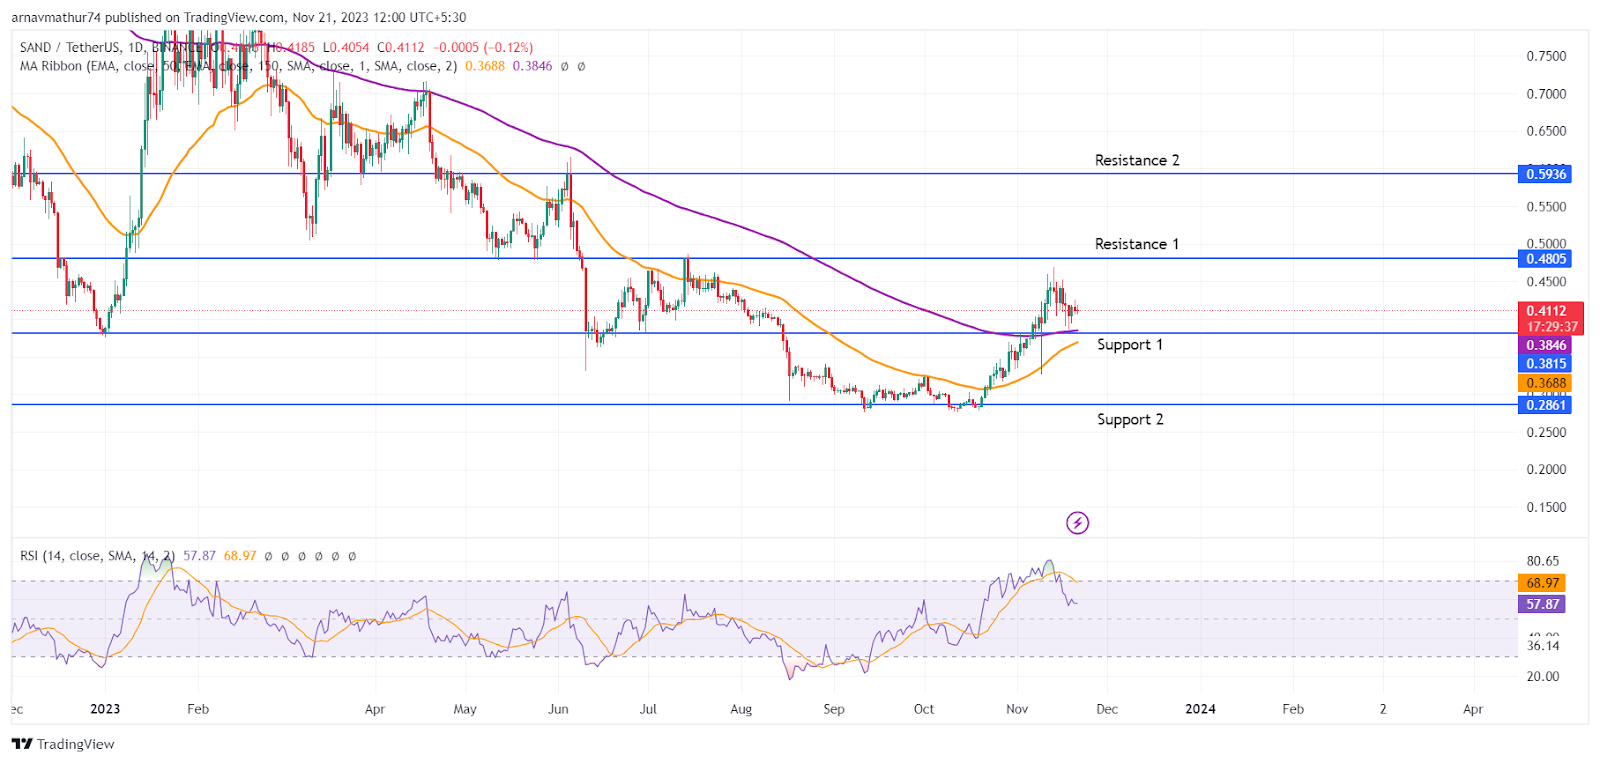 SAND Coin Price: Bulls Near Support Level, What is Next?